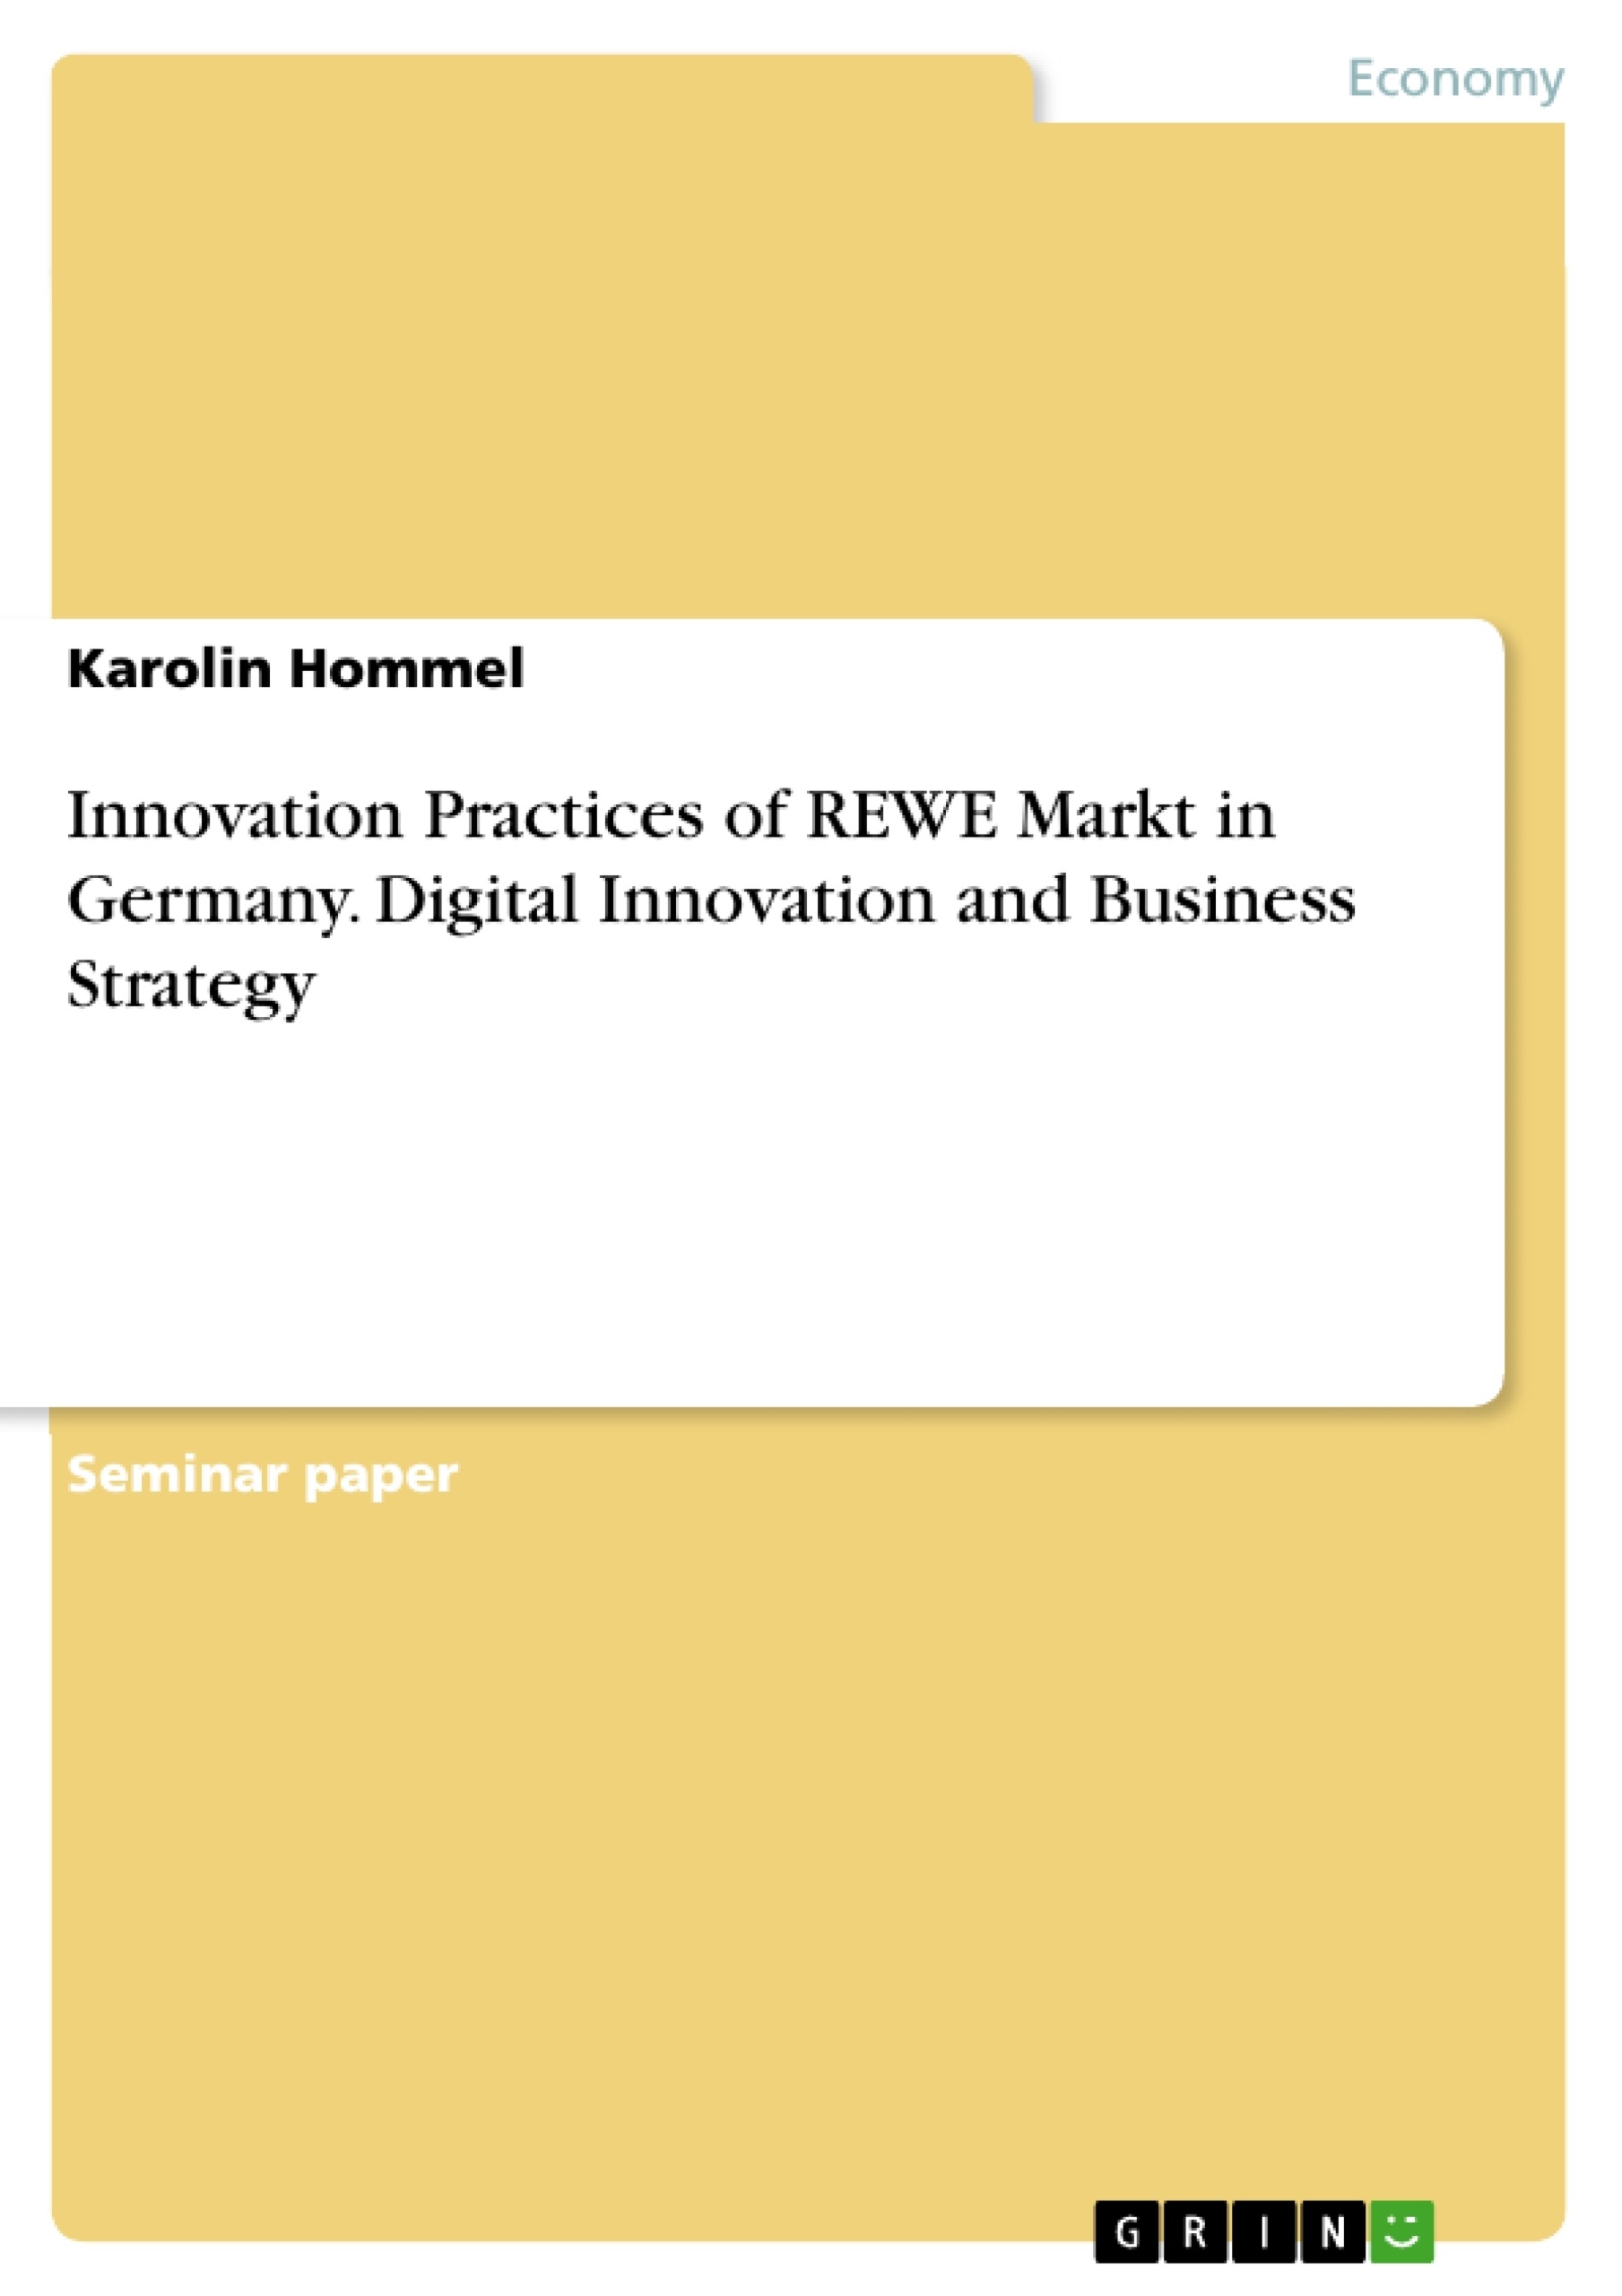 Title: Innovation Practices of REWE Markt in Germany. Digital Innovation and Business Strategy